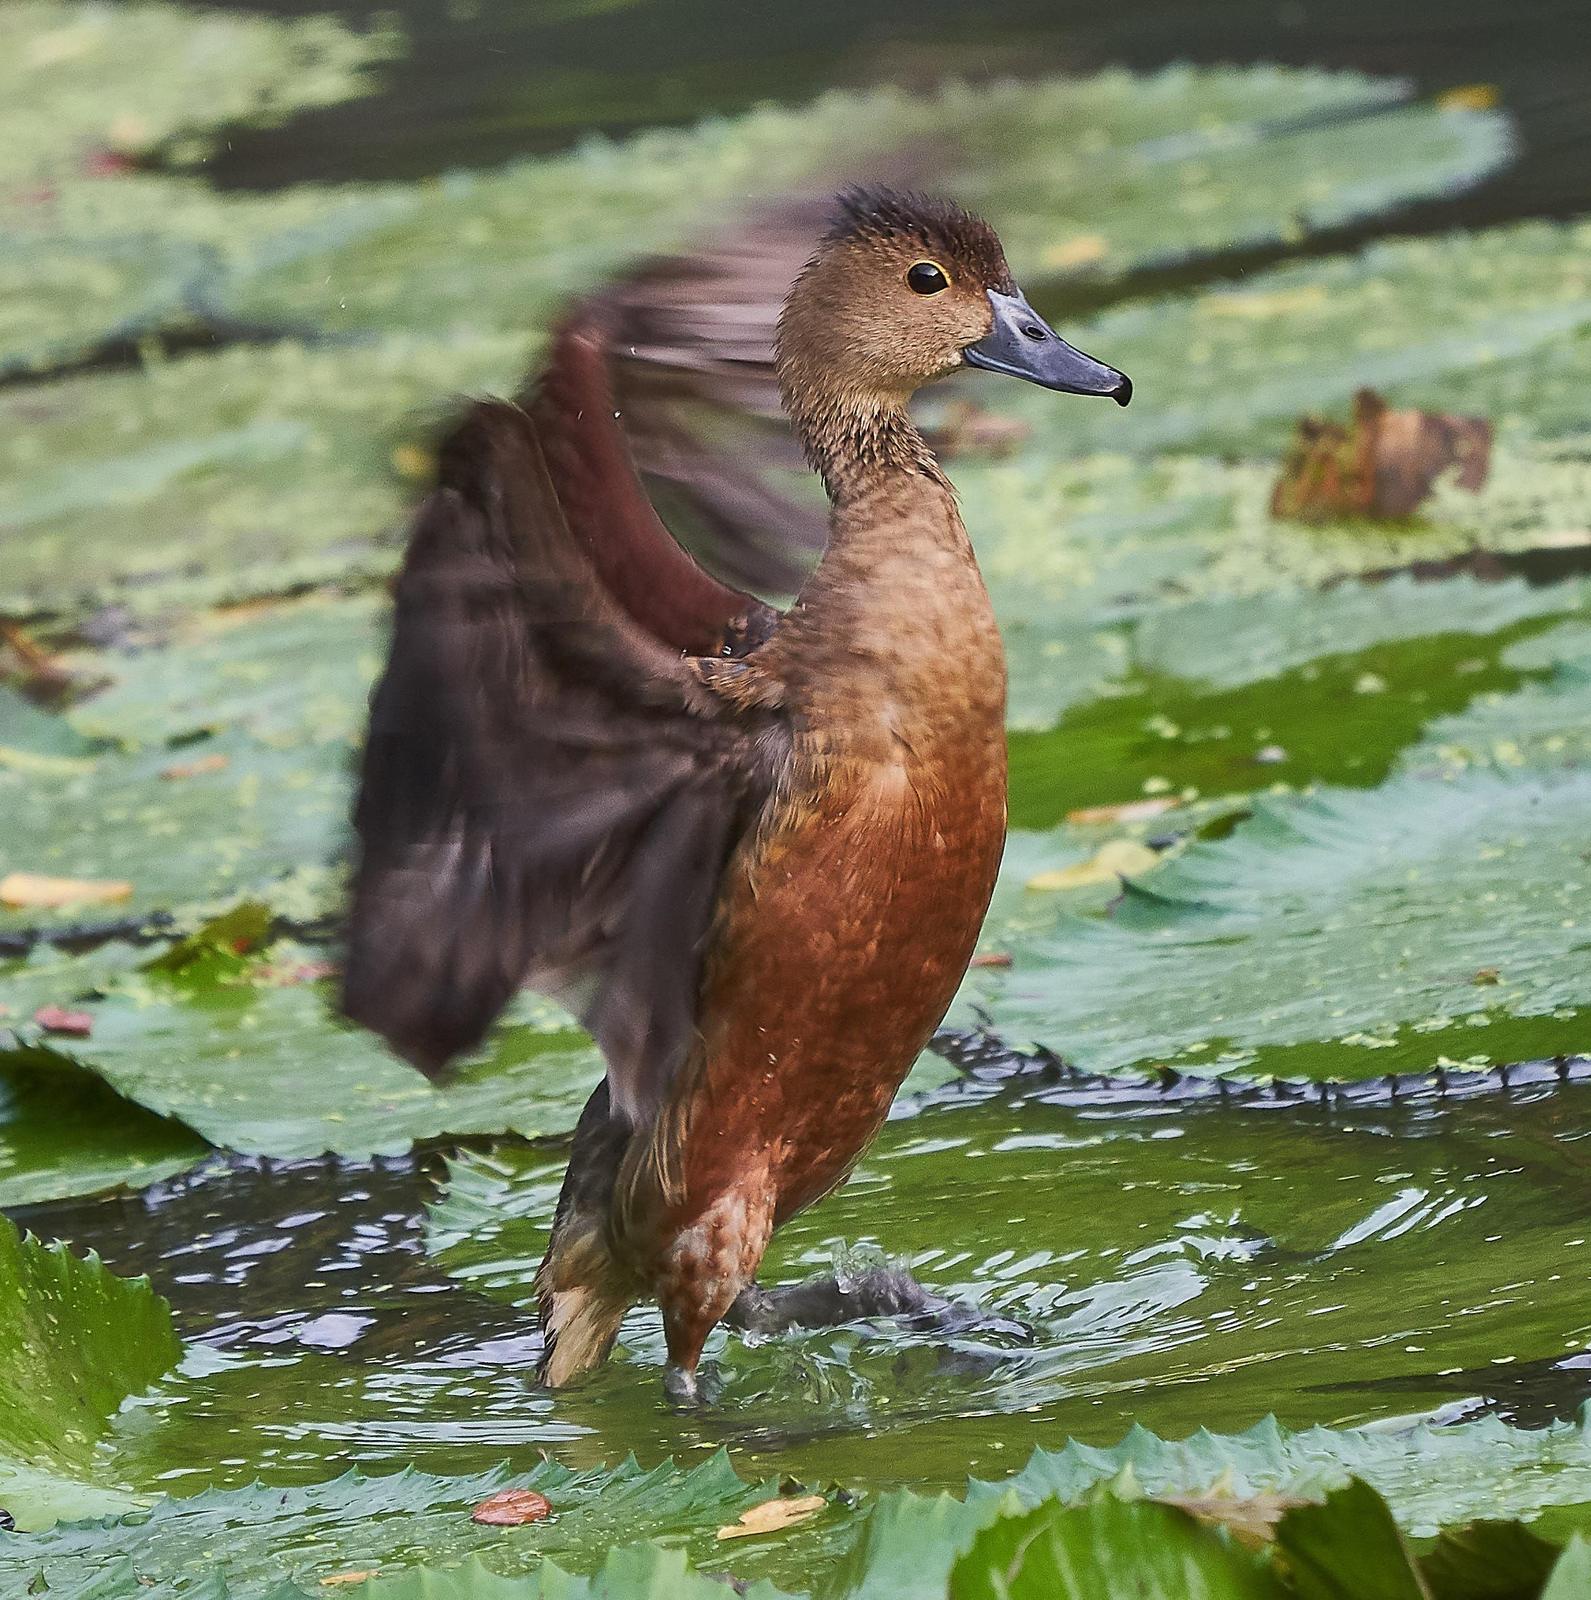 Lesser Whistling-Duck Photo by Steven Cheong